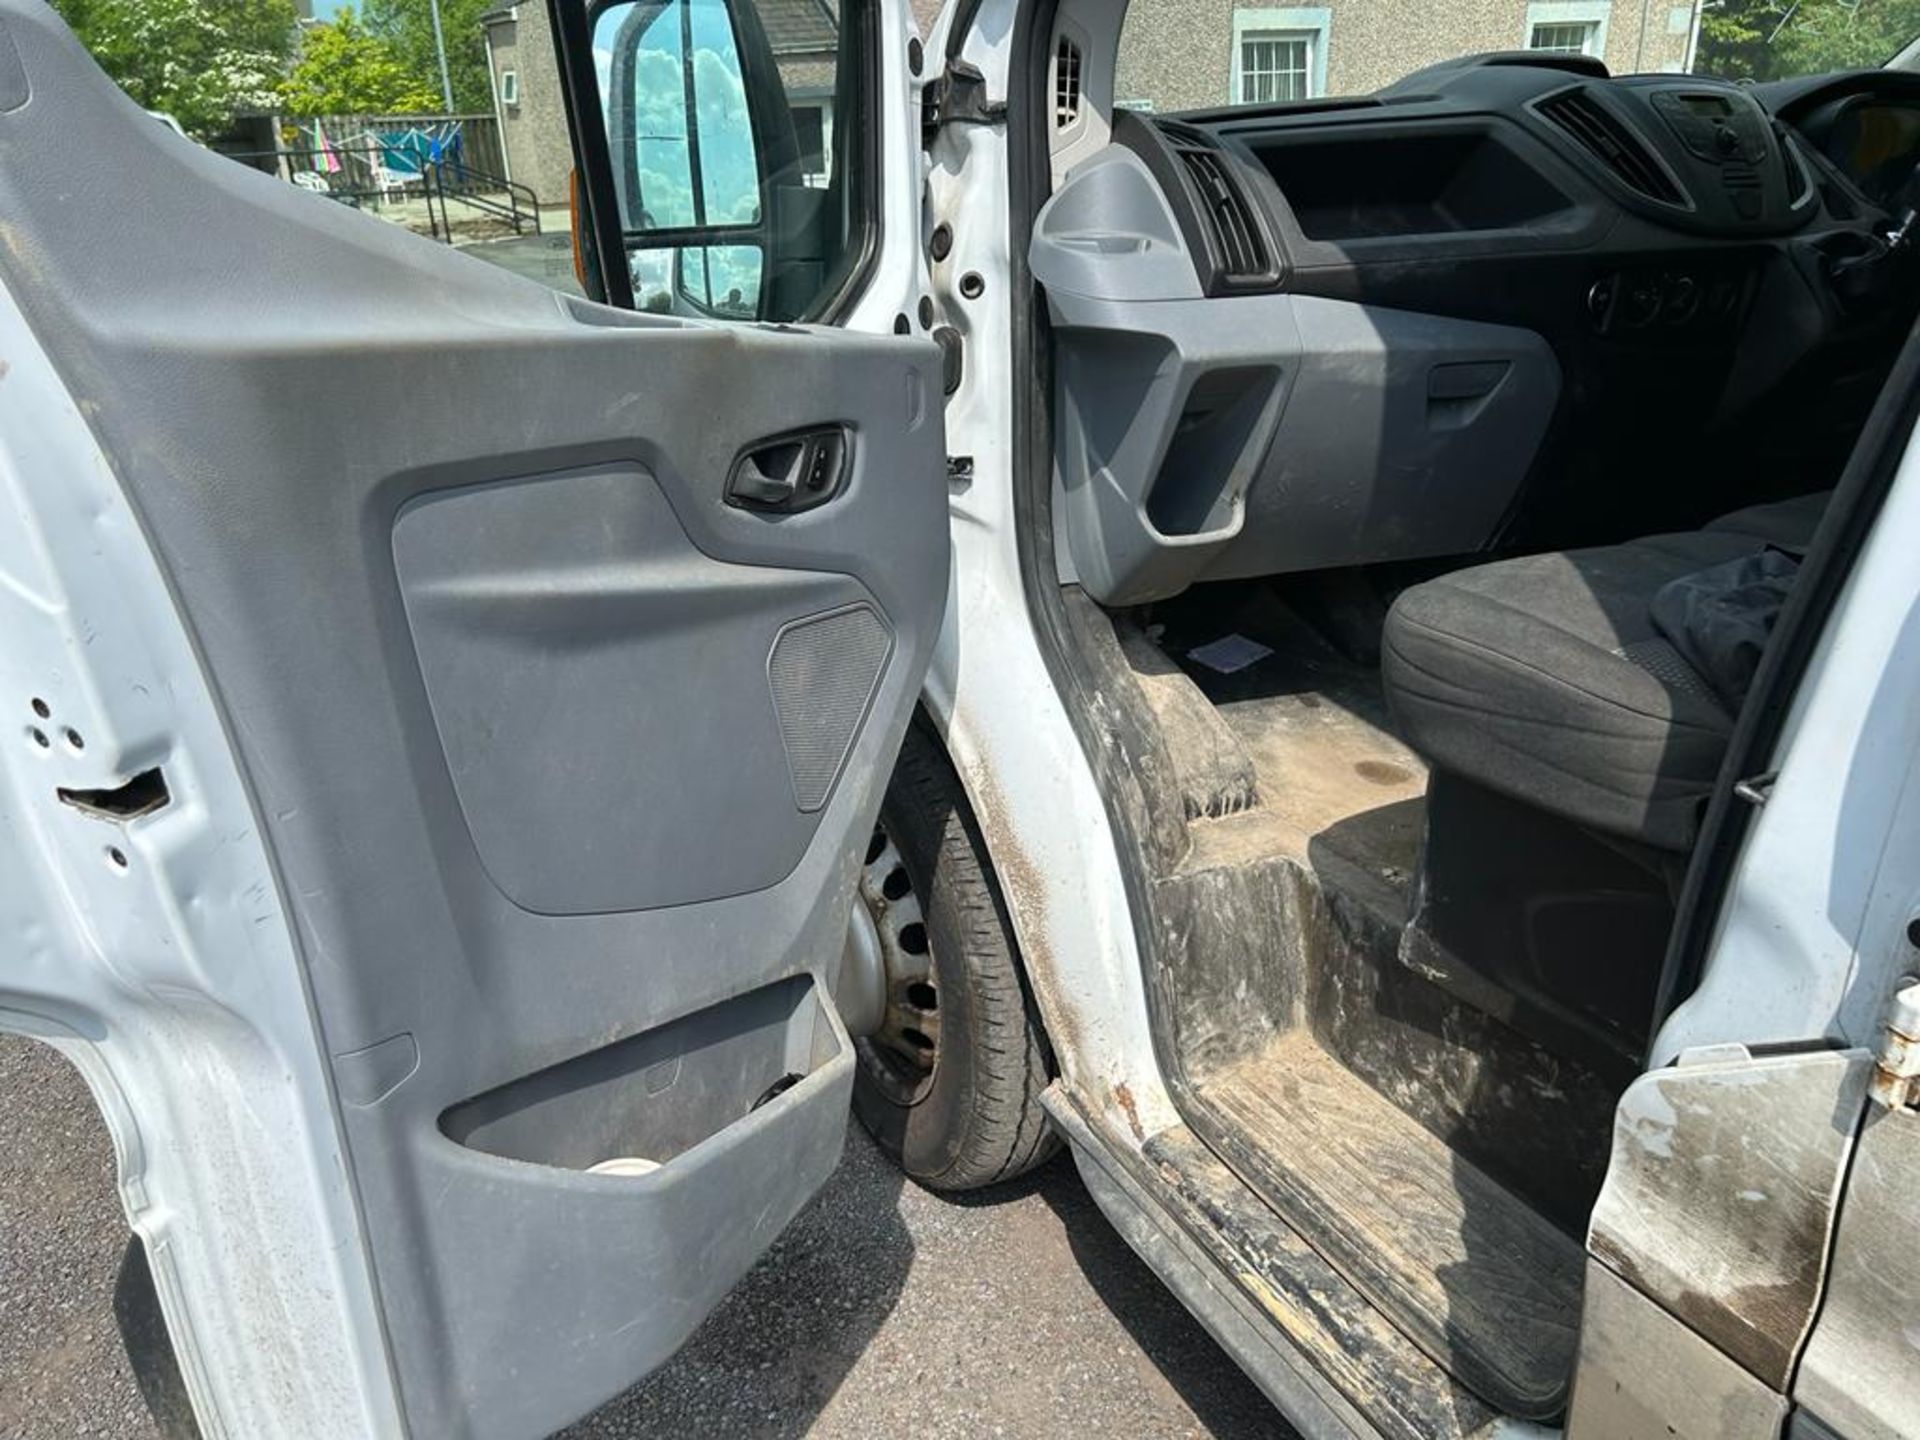 2018 FORD TRANSIT CREW CAB TIPPER - Image 10 of 13